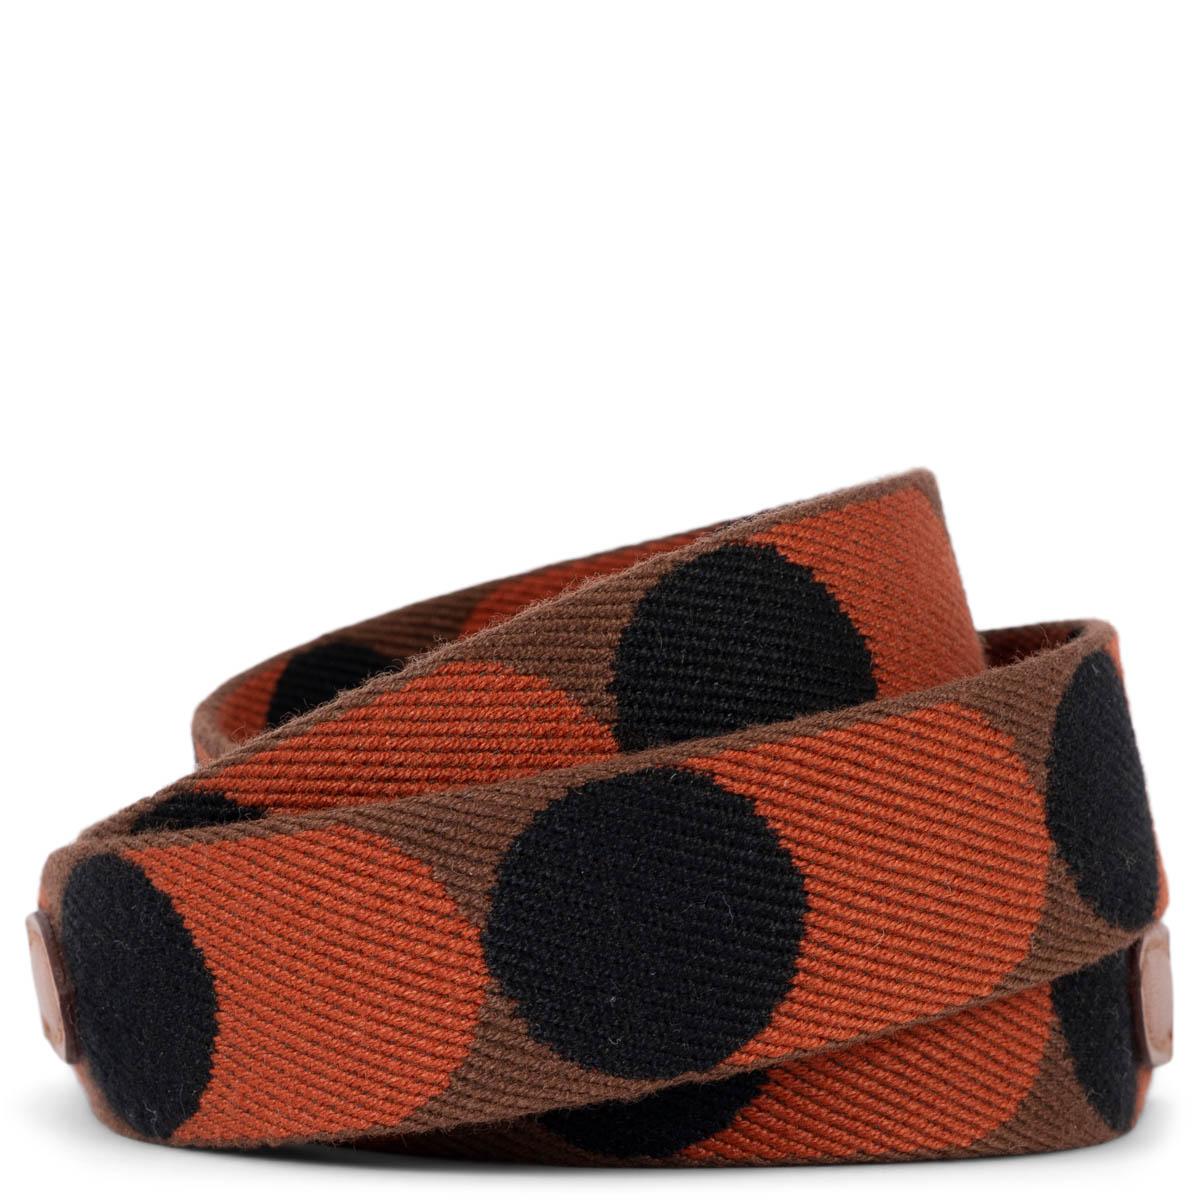 100% authentic Hermès Flipperball 25mm bag strap in camel, orange and black canvas with Gold (camel) Swift leather trims and palladium hardware. Has been carried and is in excellent condition. Comes with dust bag and box.